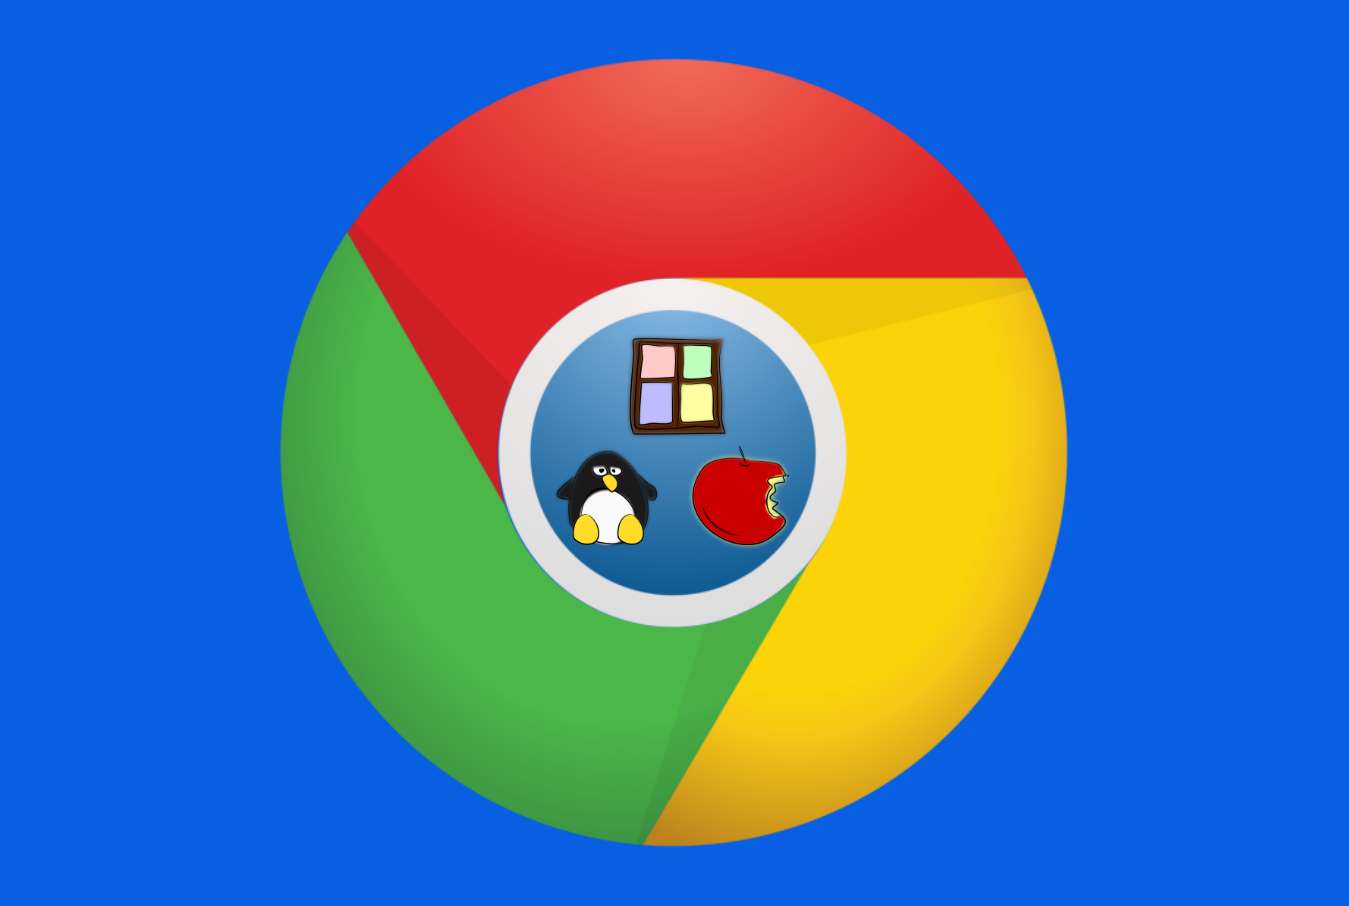 Google issues patches for Chrome flaw for Windows, Mac and Linux